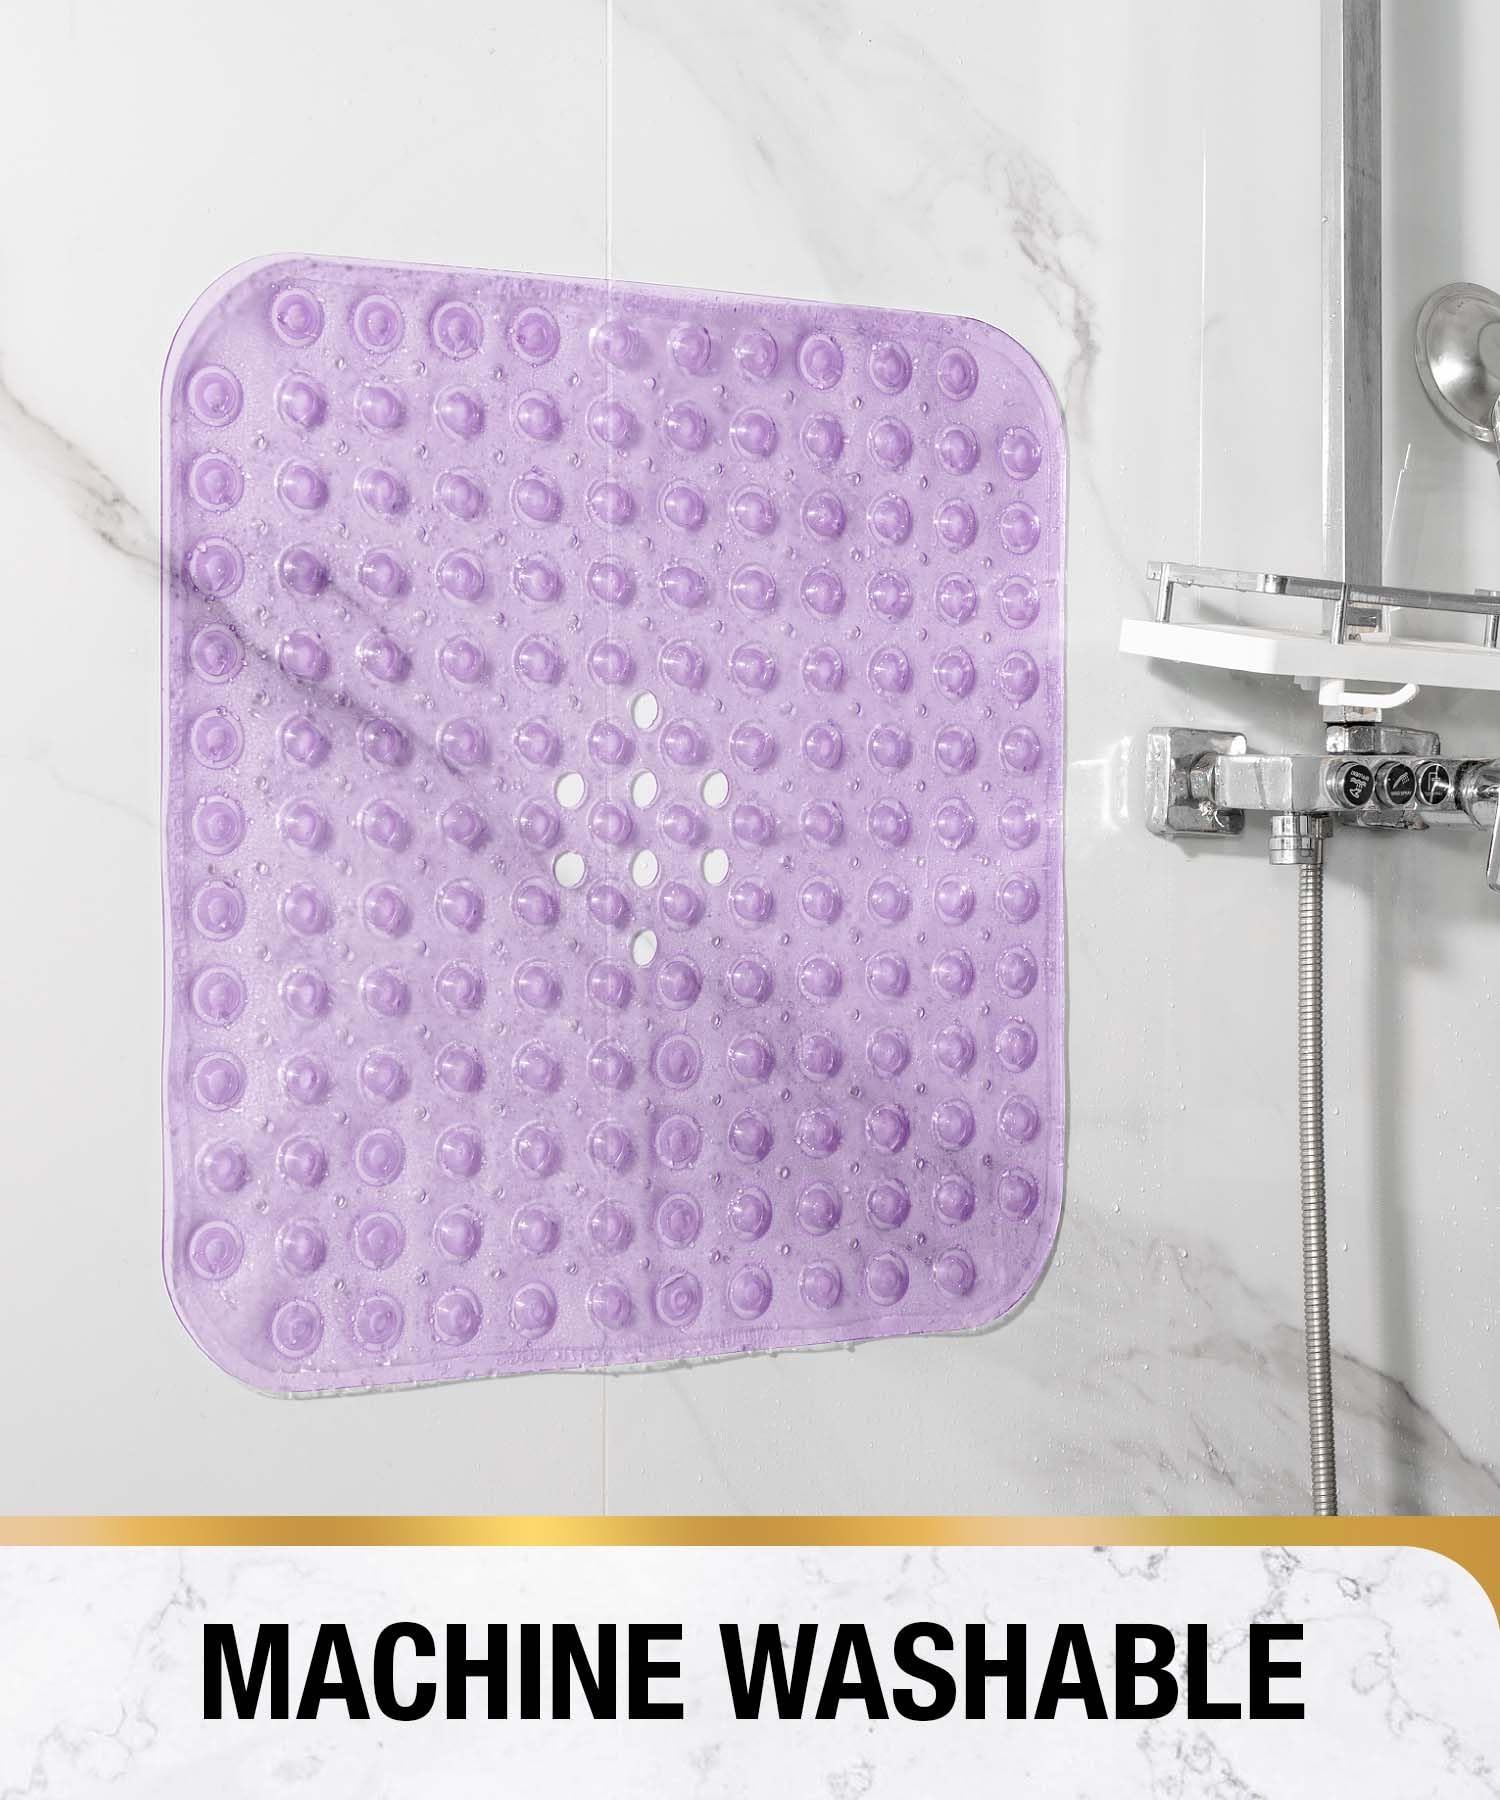 Square Shower Mat丨 21x21 Inch Bath Mat for Tub丨With Suction Cups and Drain Holes丨Machine Washable Bathroom Shower Stall Floor Mat